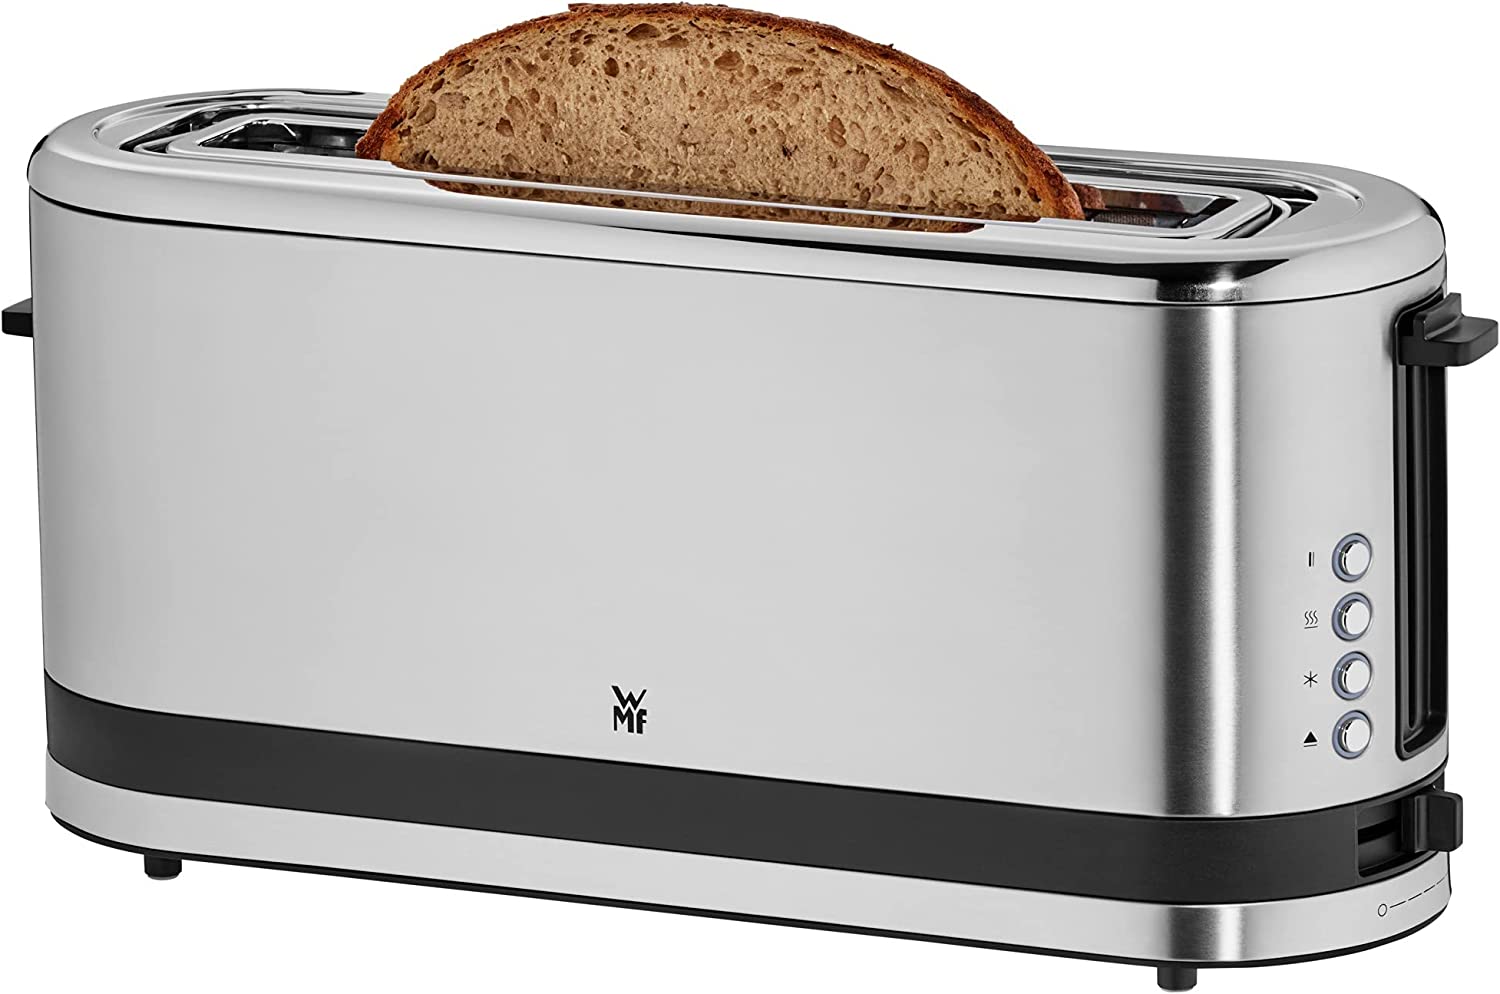 WMF Küchenminis Long Slot Toaster with Integrated Bread Rolls Warmer